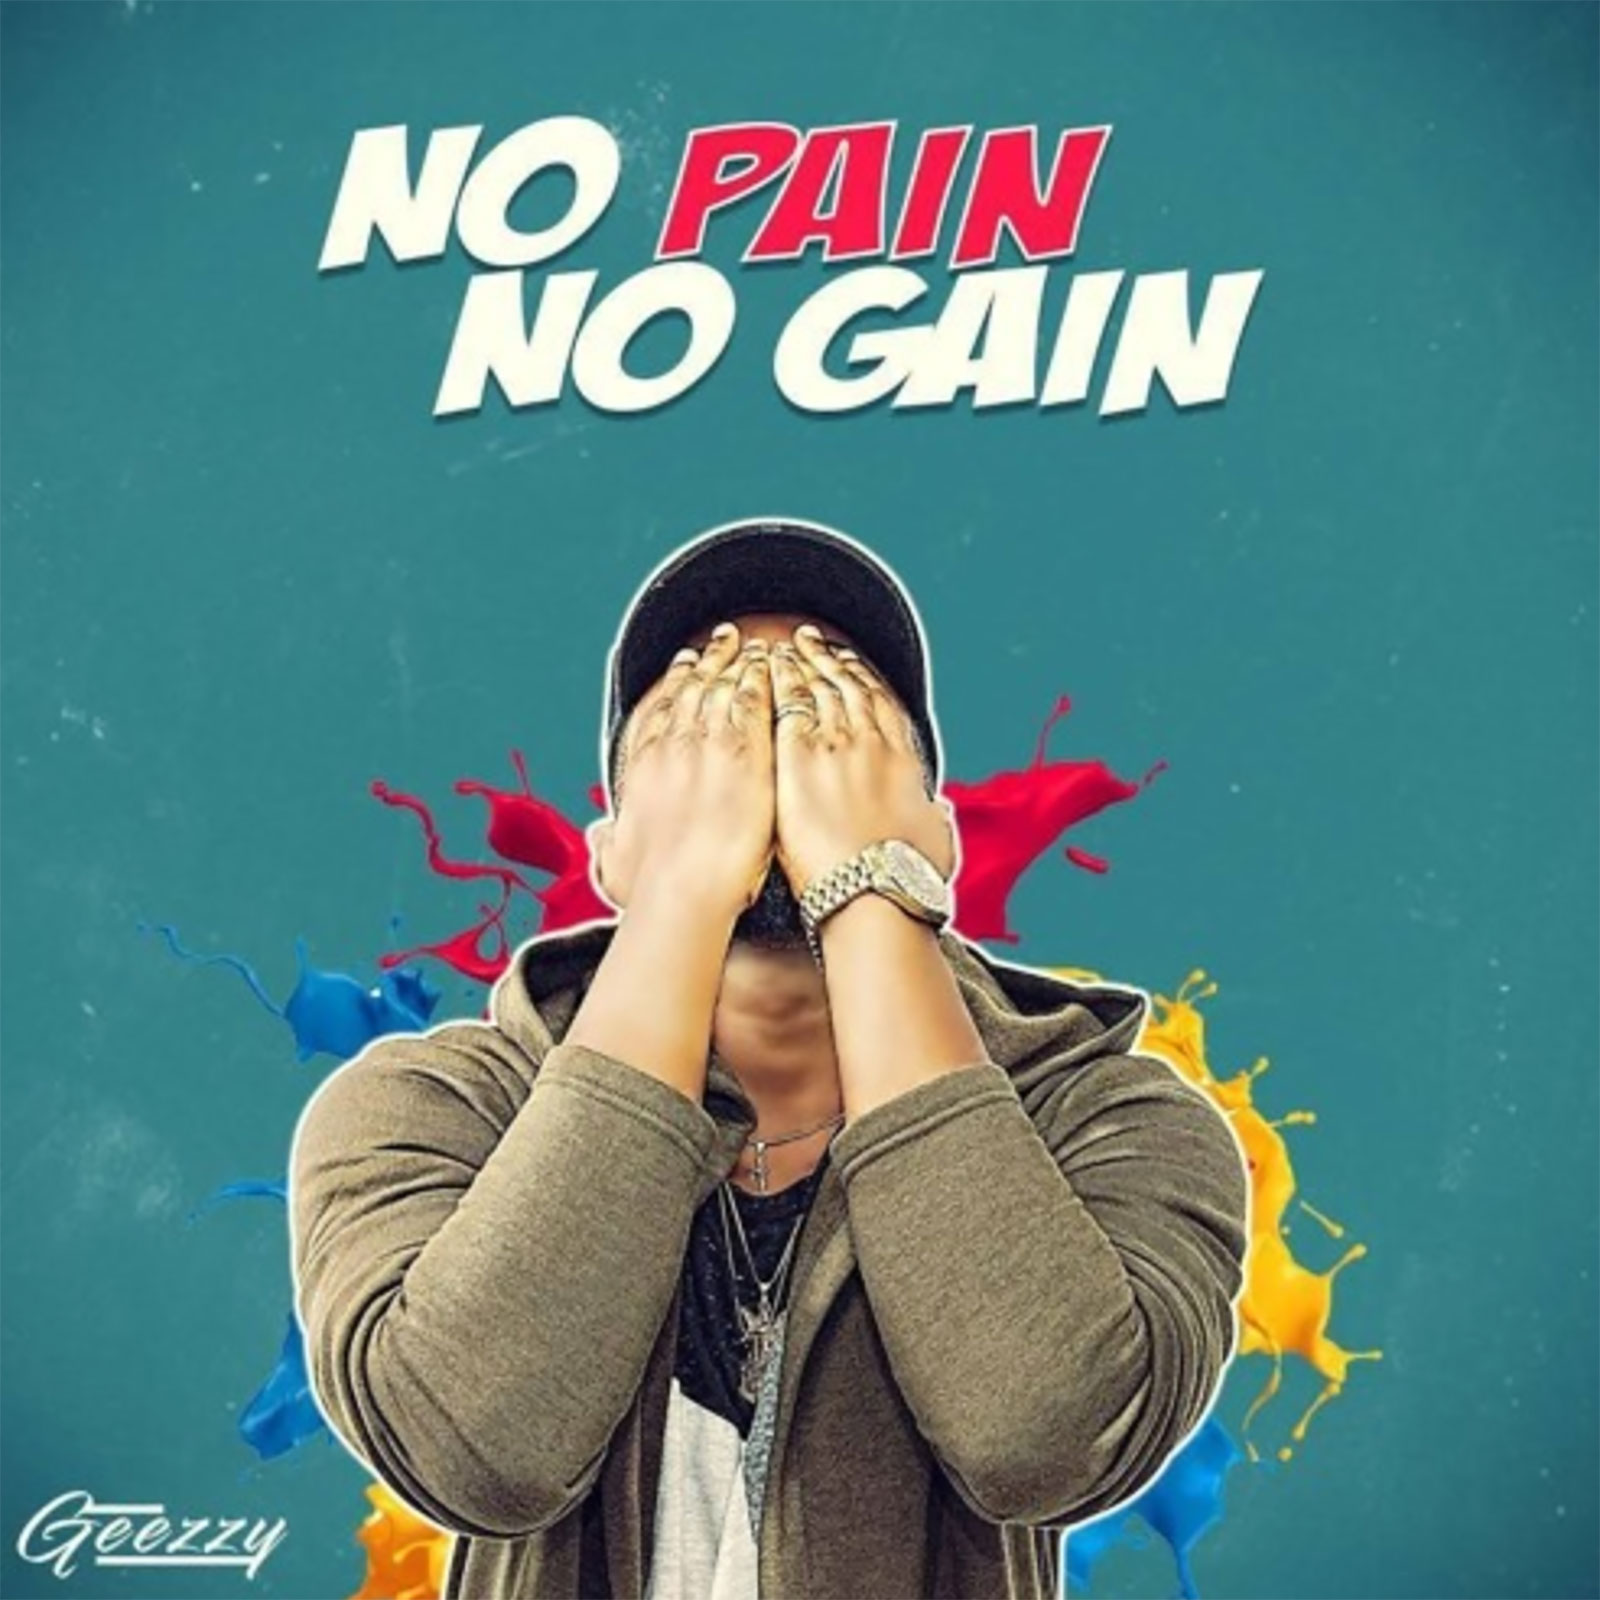 No Pain No Gain by Geezzy